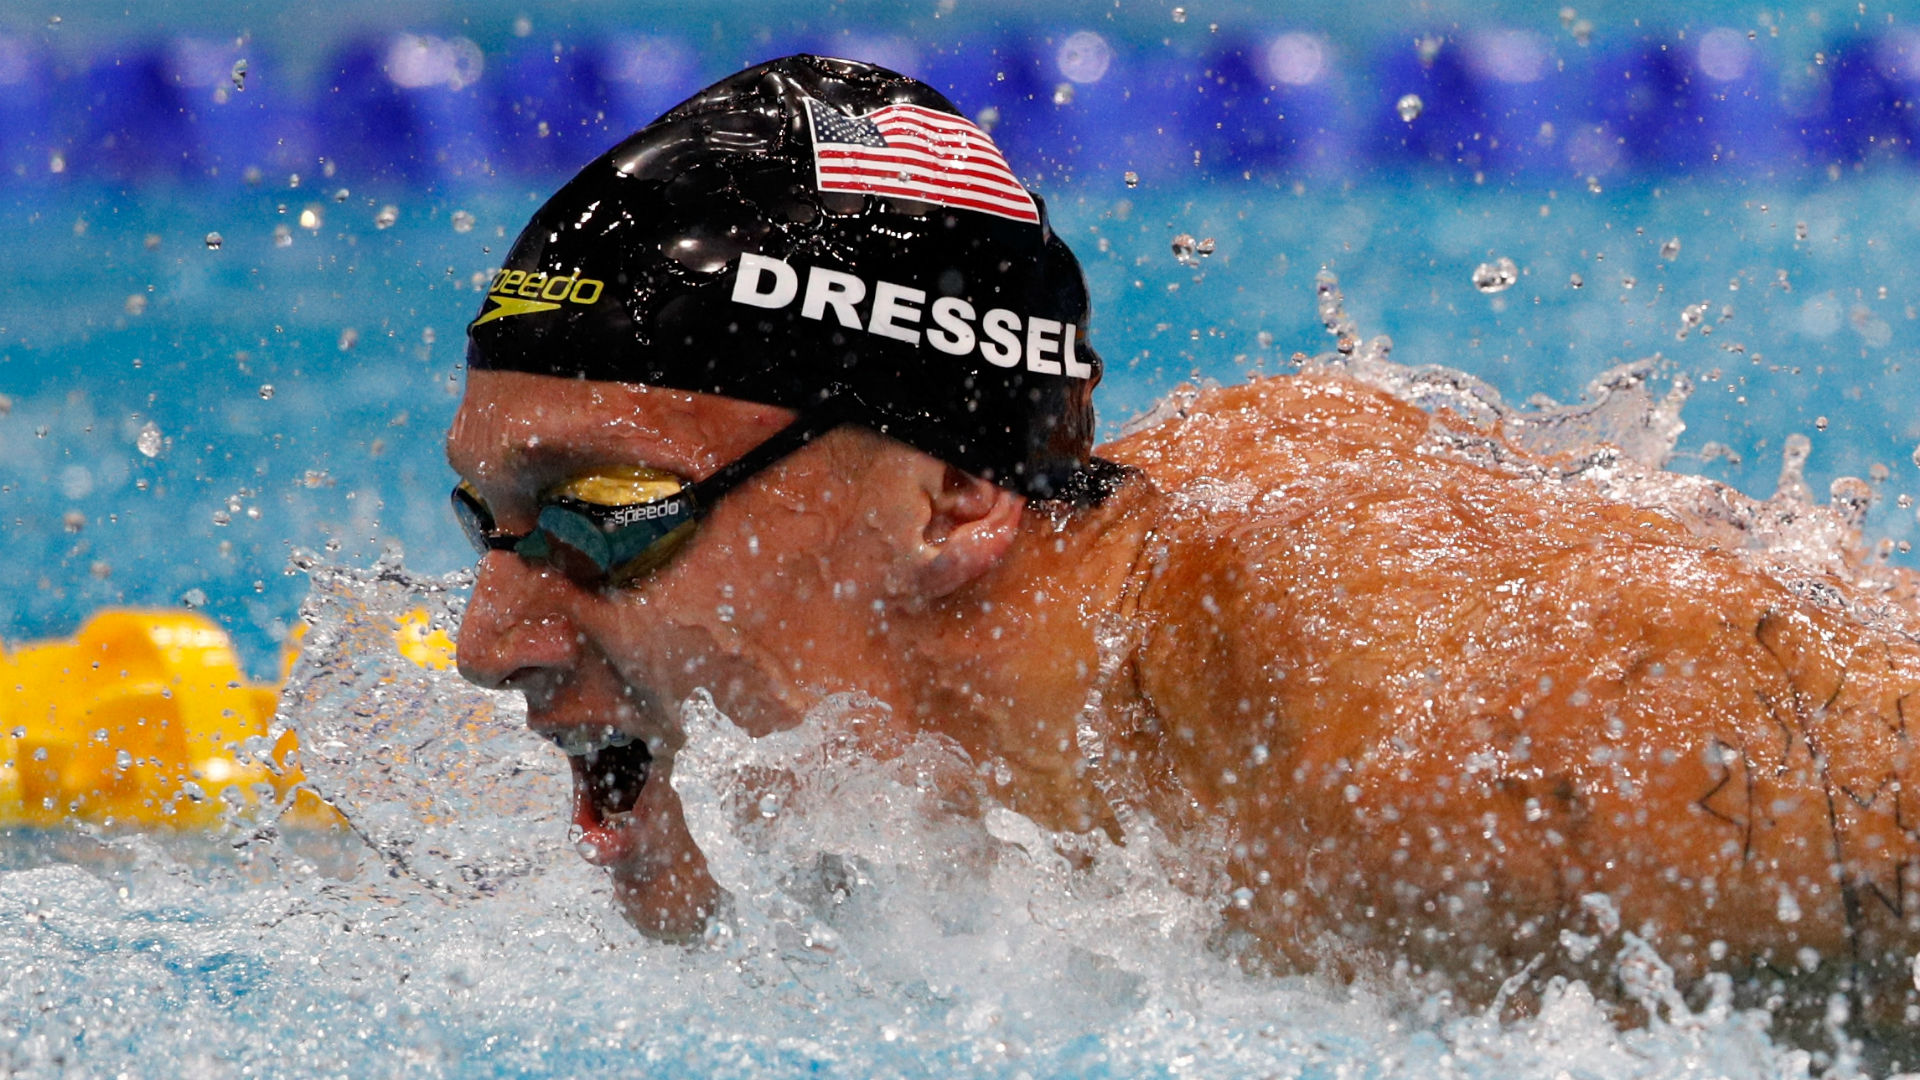 Seven up! Dressel matches Phelps' record world championship medal haul